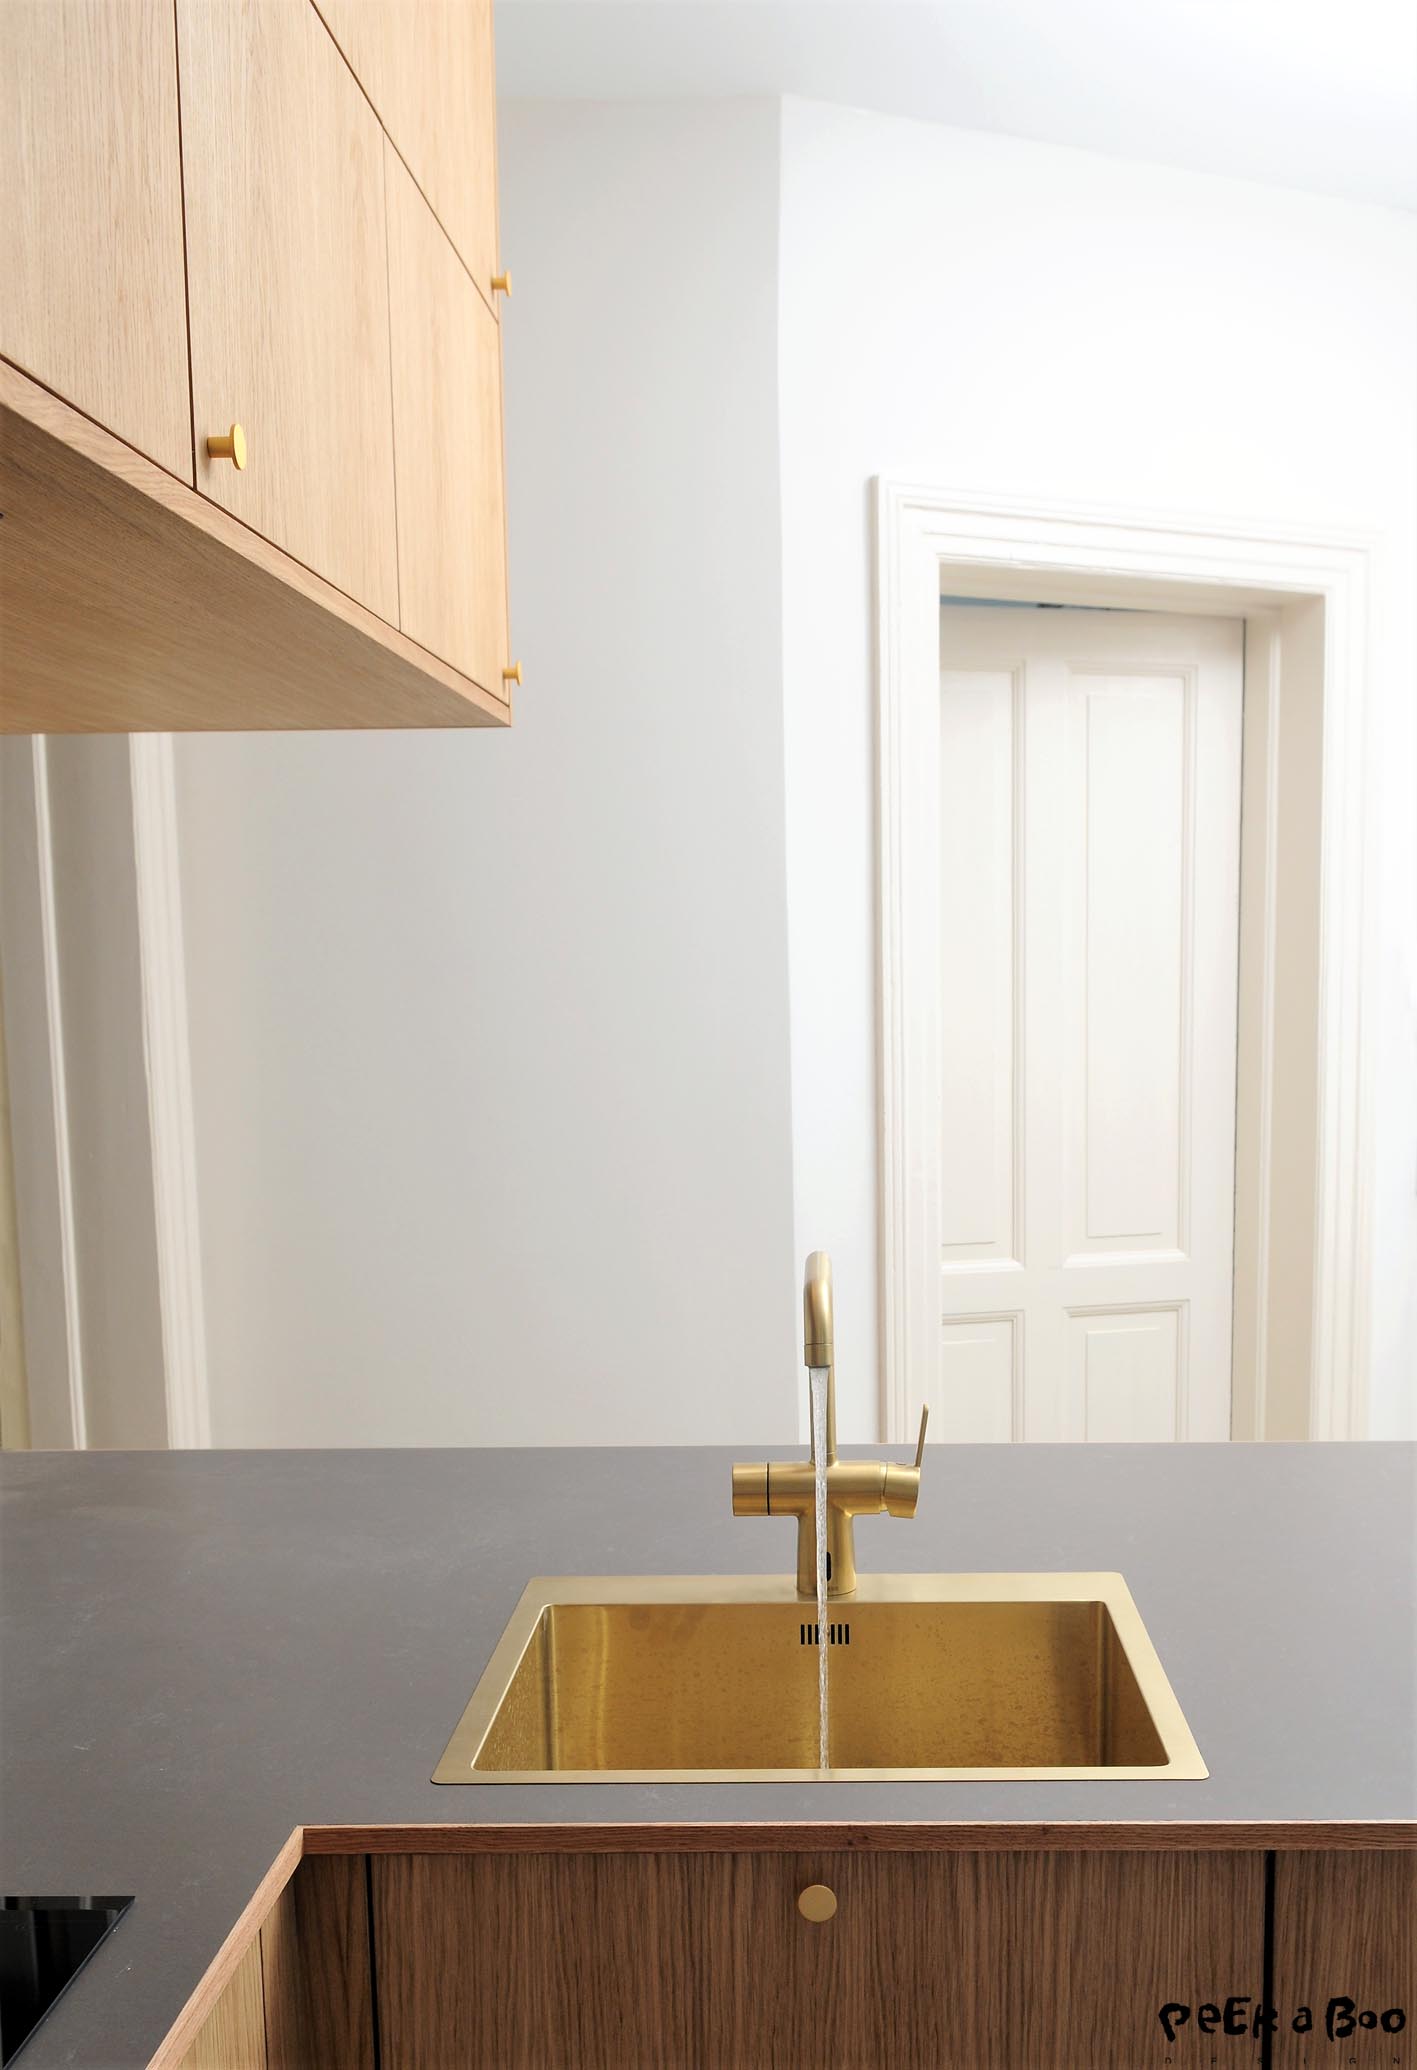 The Lavabo Kubus 540 zink in brass and the Damixa Silhuet brushed brass touchless tap.